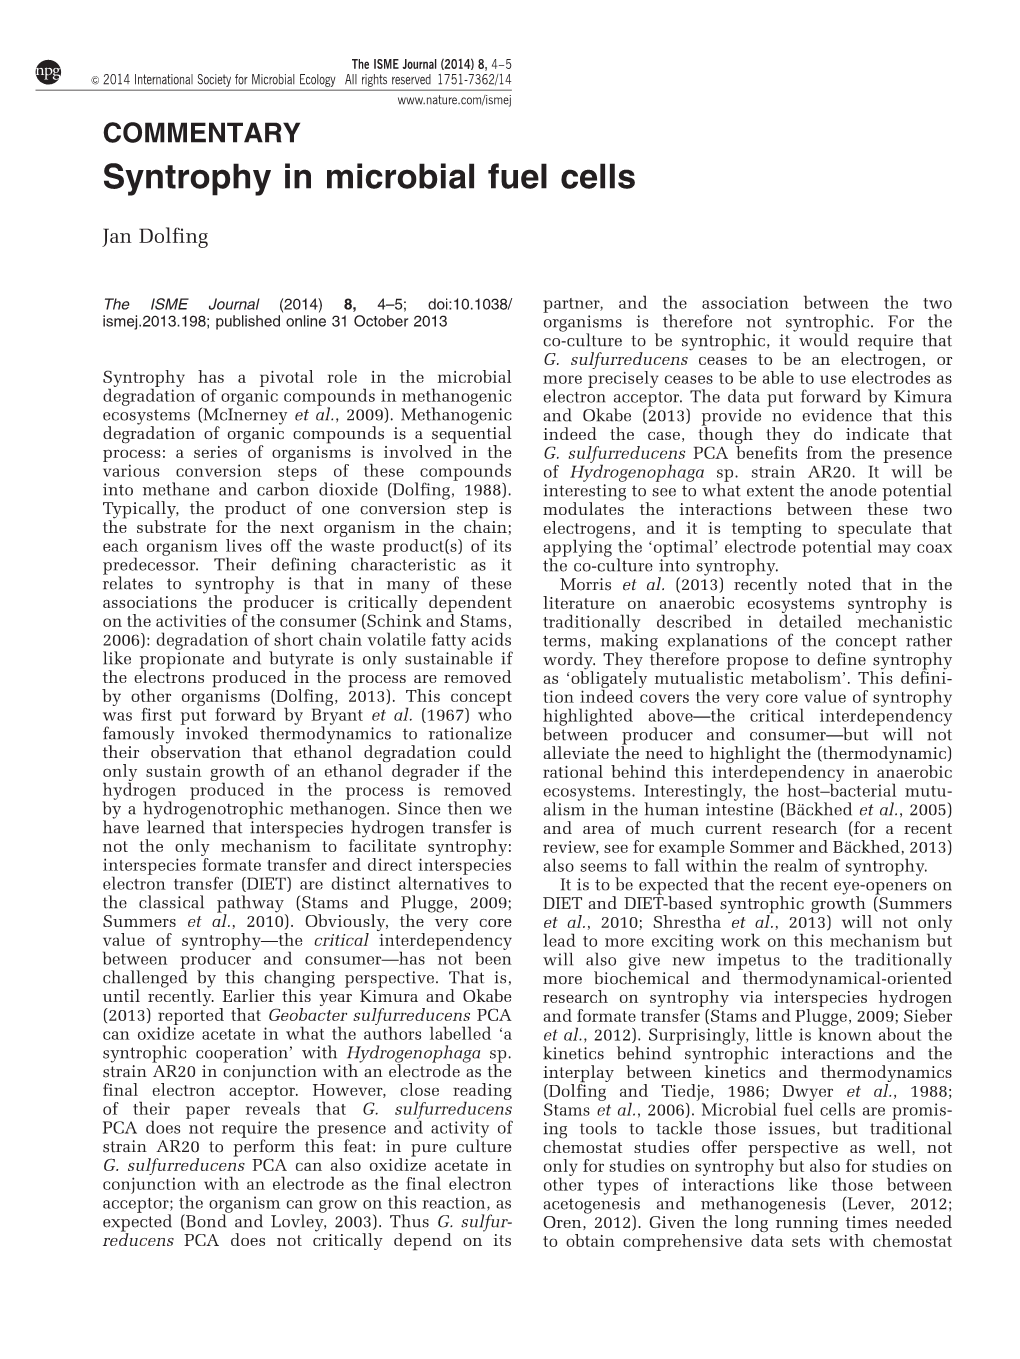 Syntrophy in Microbial Fuel Cells